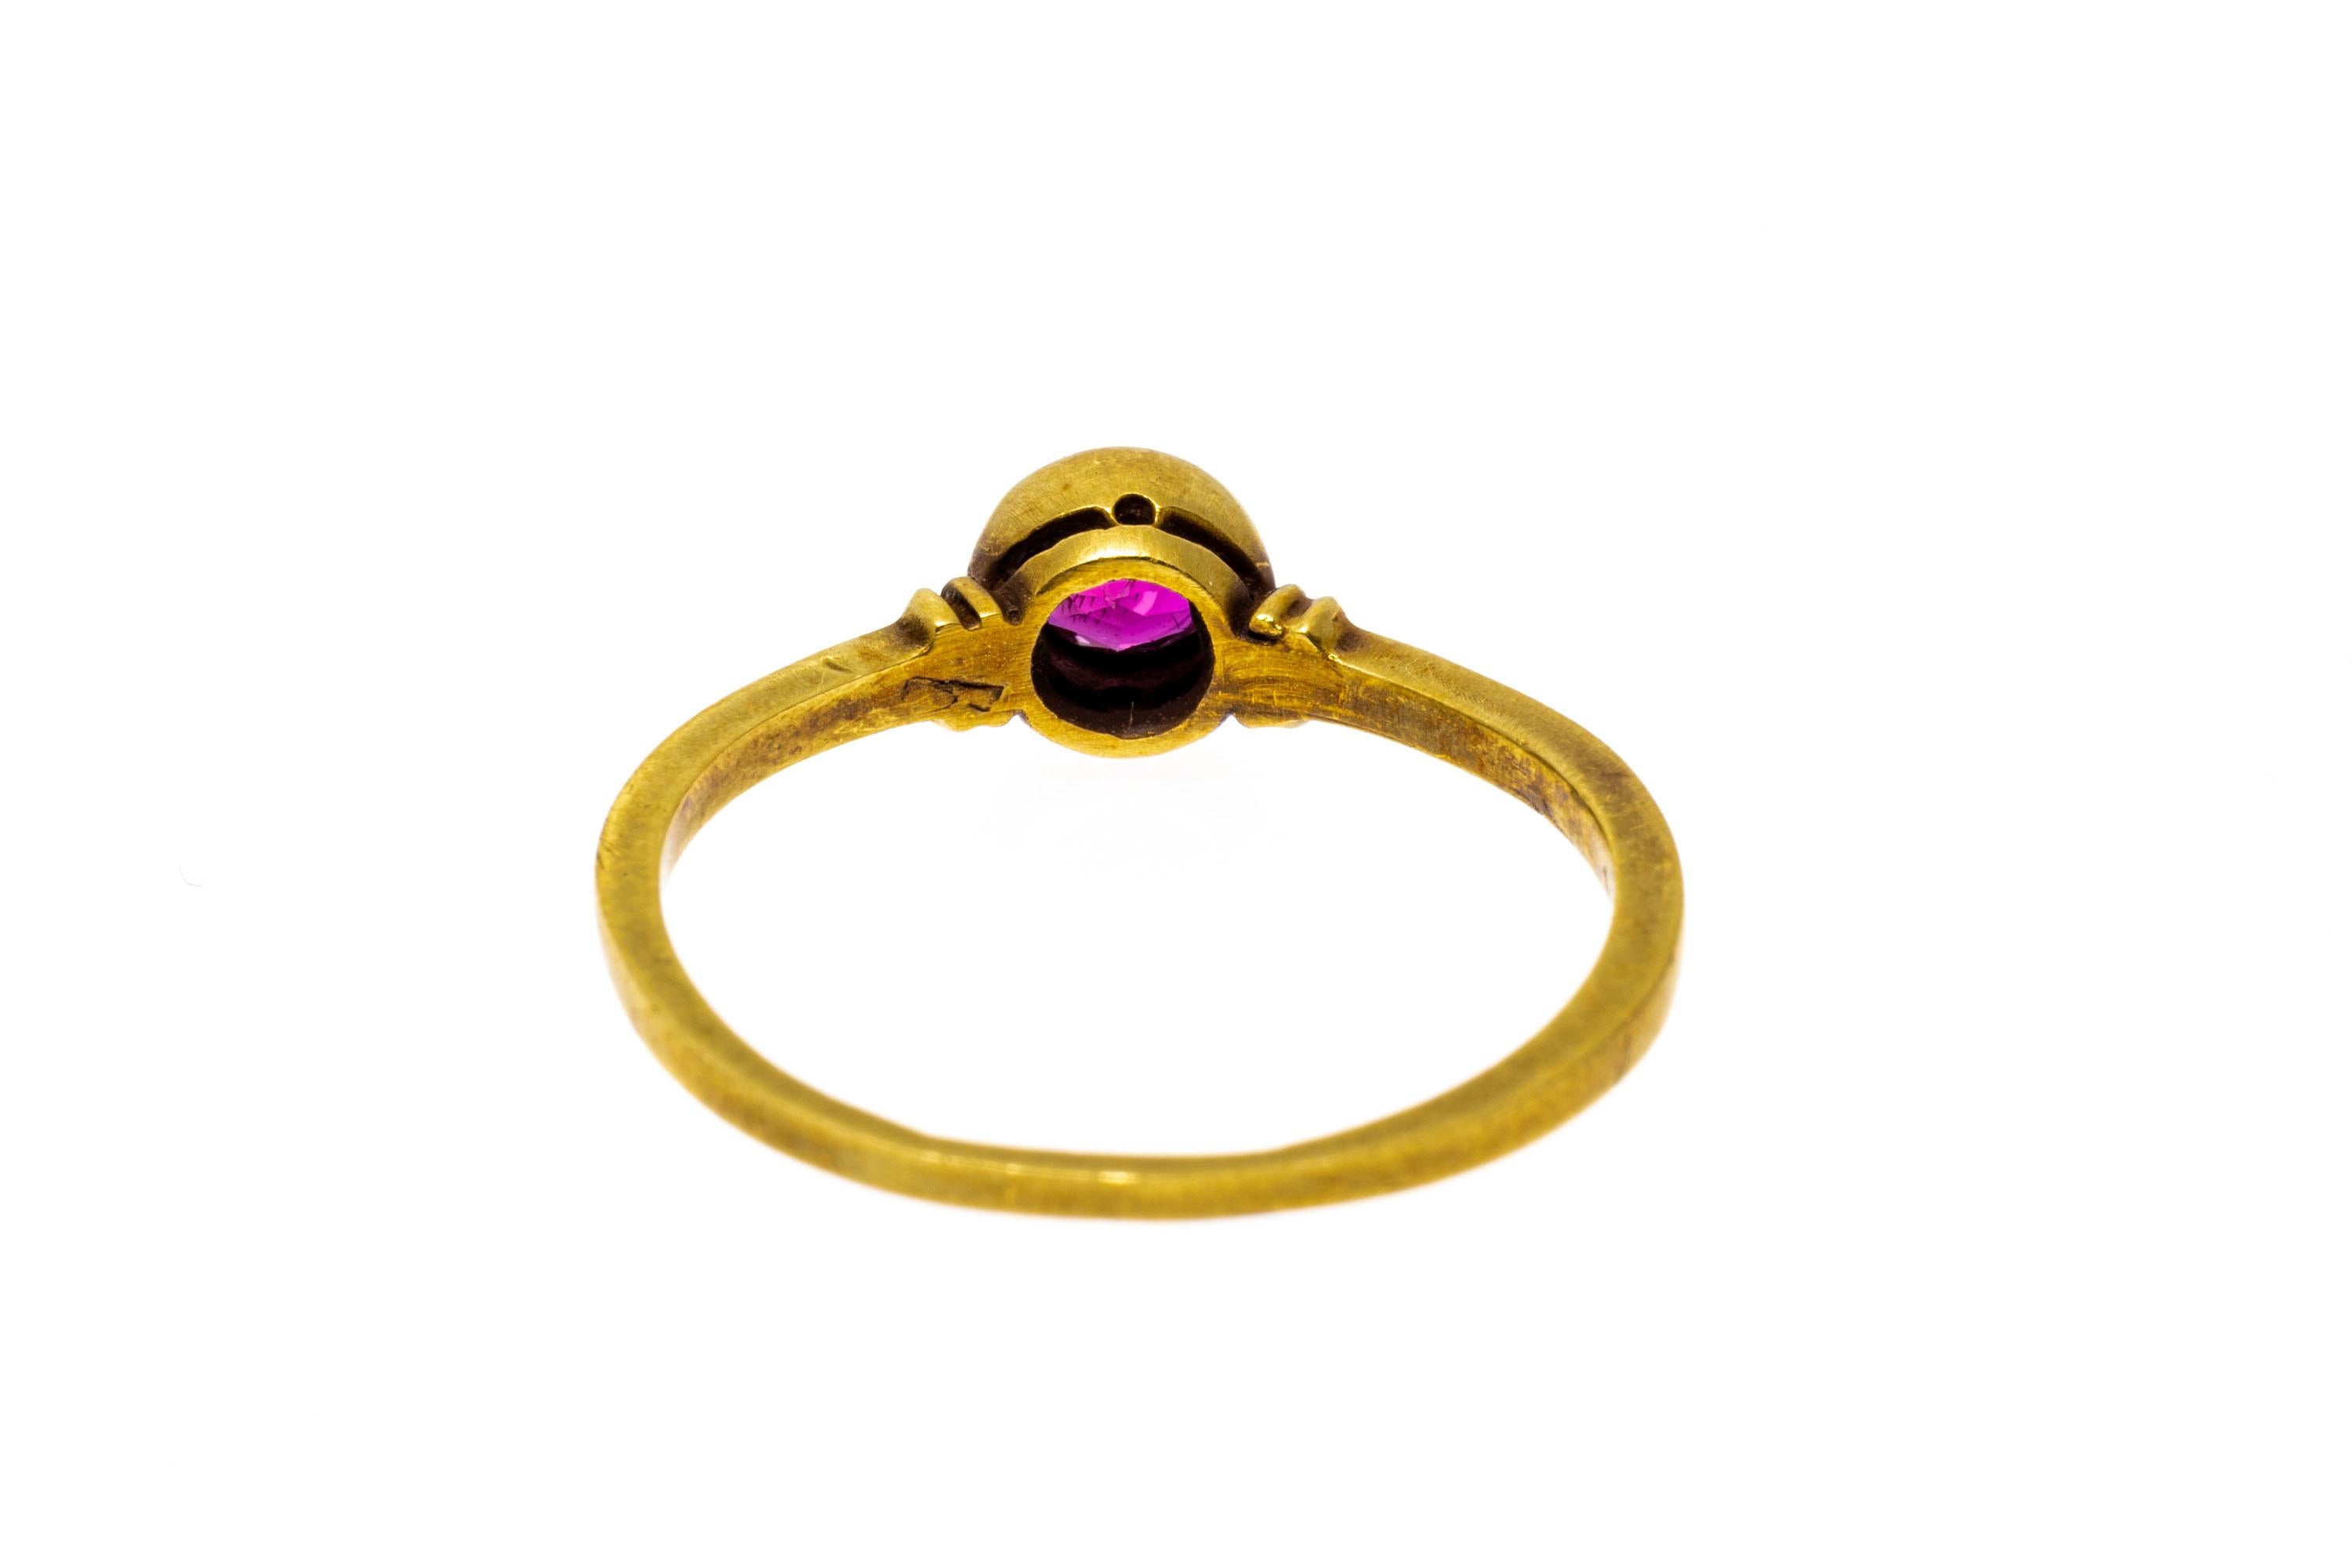 14k yellow gold ring. This pretty and simple ring is a burnished yellow gold, set in the center with a round faceted ruby, approximately 0.23 CTS, set into a high bezel and finished with ridged shoulders.
Marks: 14k
Dimensions: 9/32